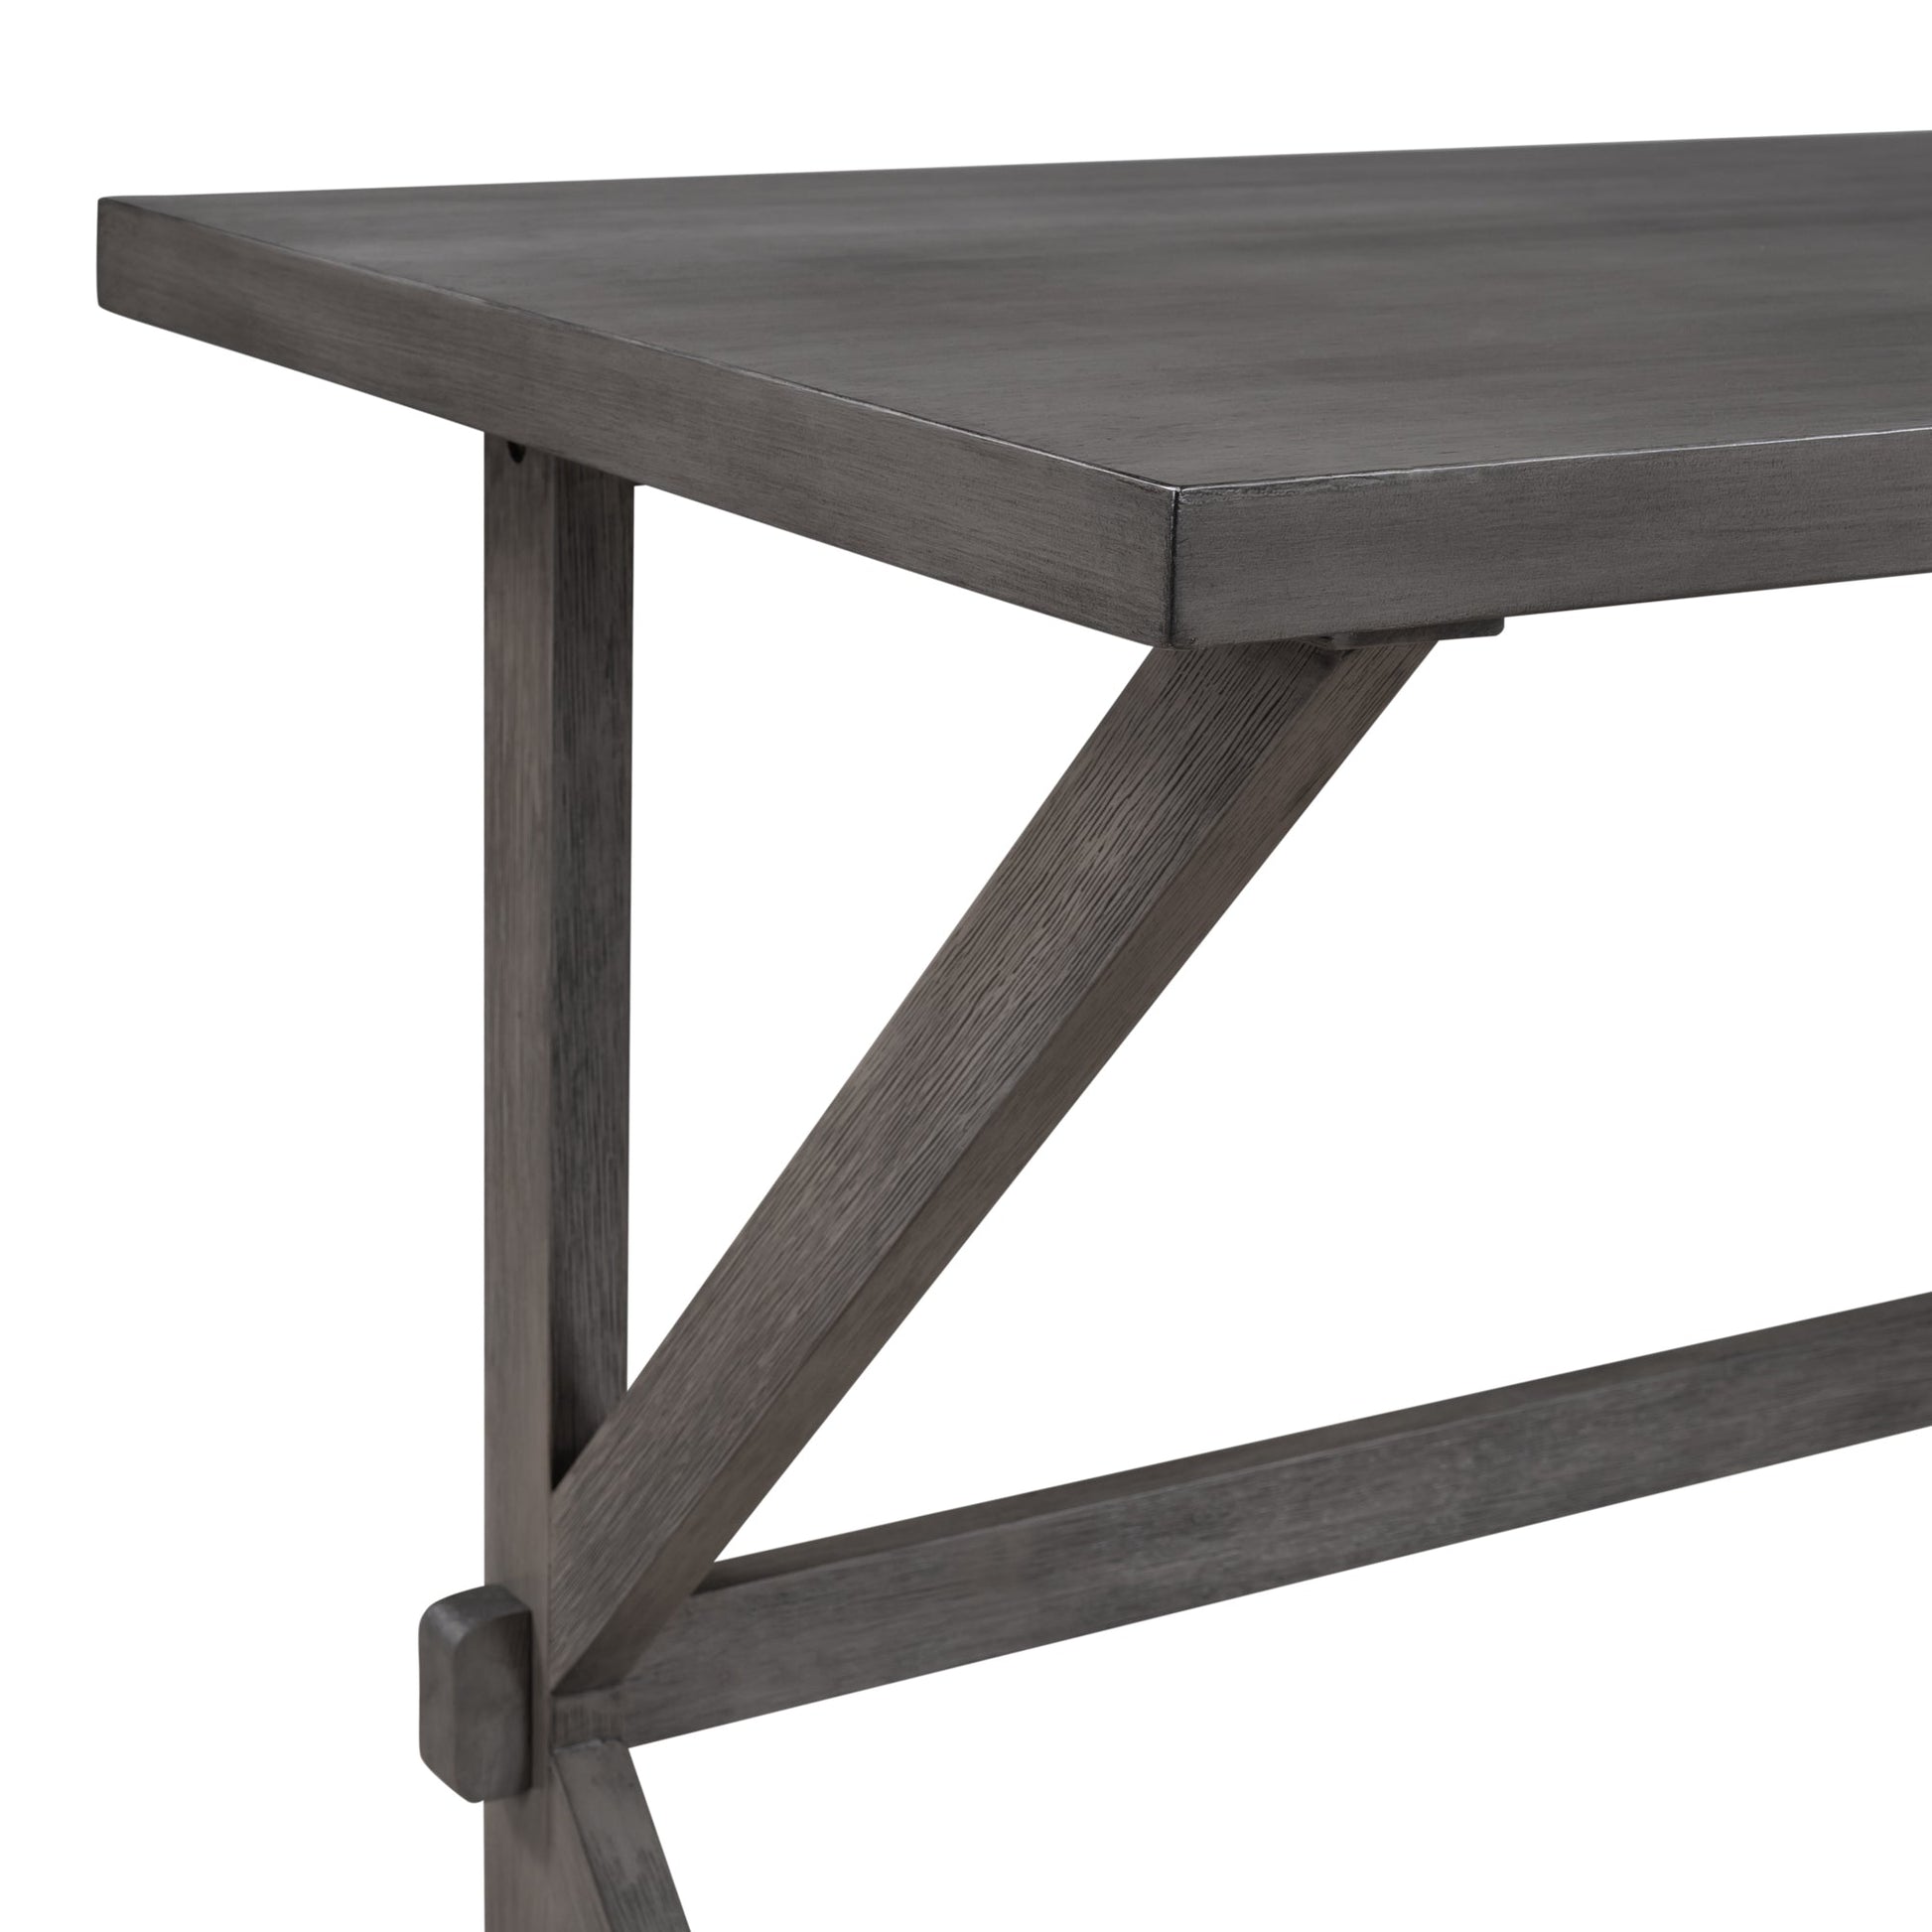 Farmhouse Rustic 3-piece Dining Table Set with 2 Stools Gray+Beige Cushion - Demine Essentials